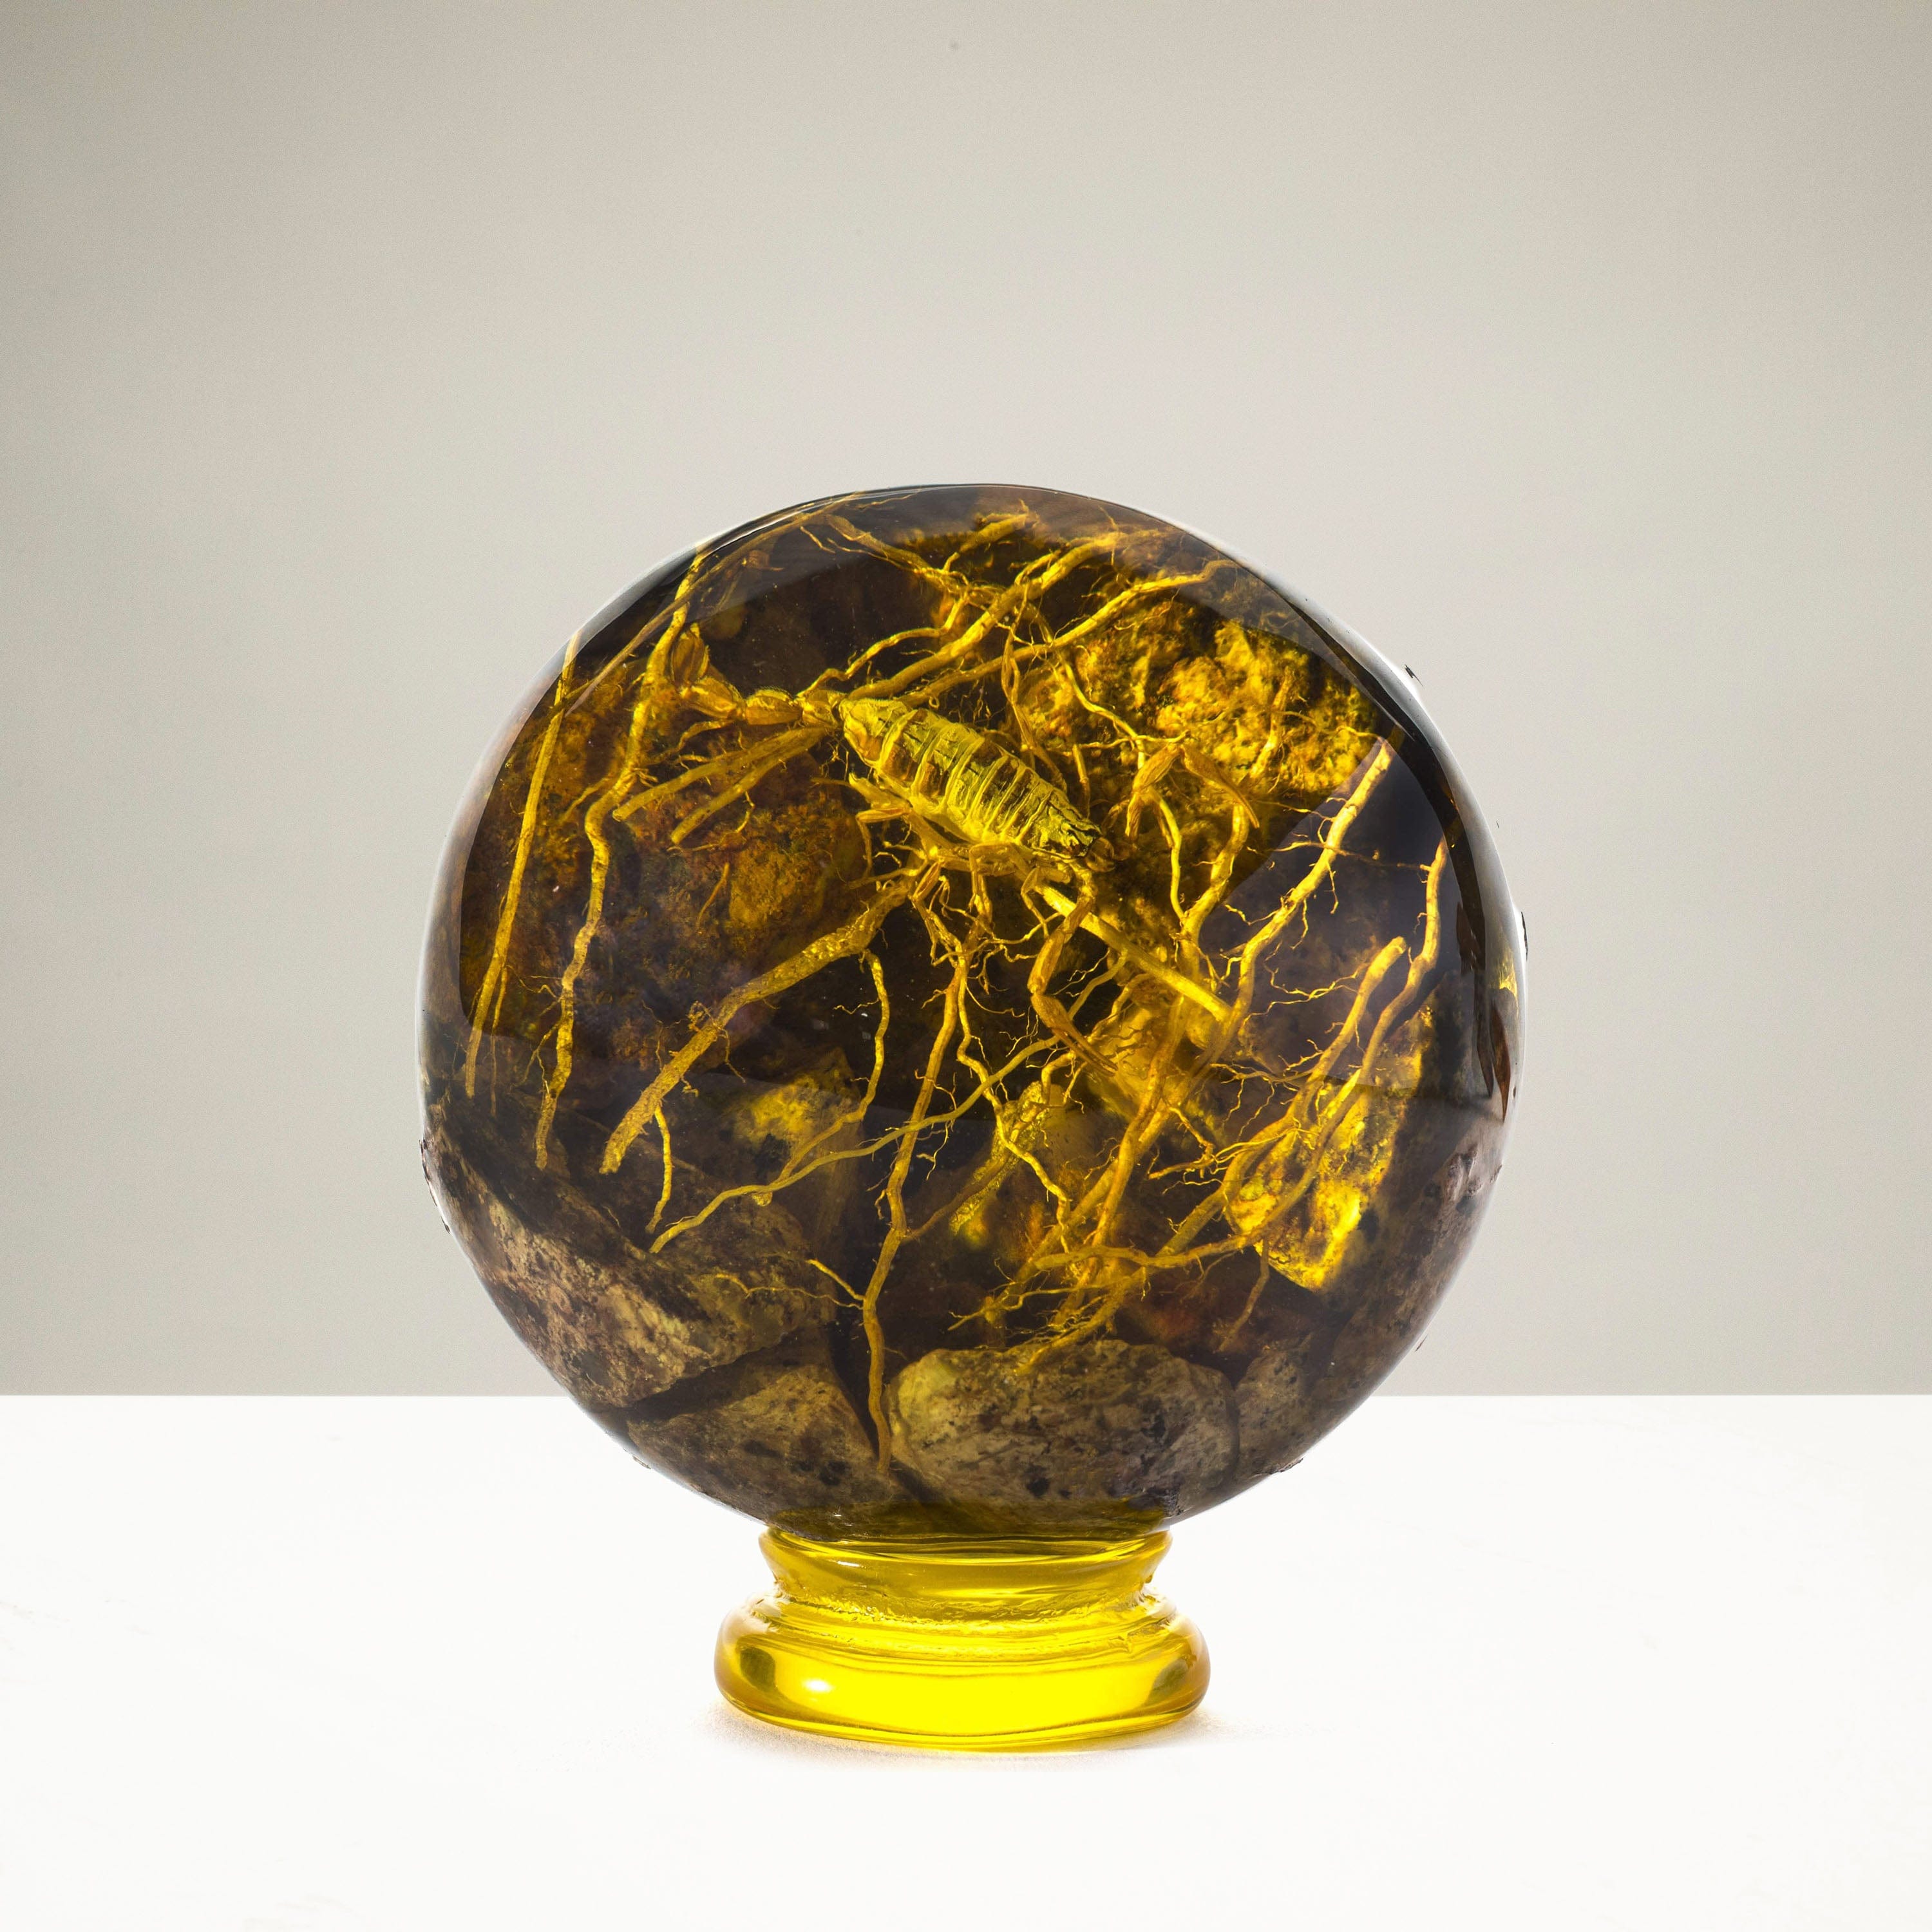 Kalifano Amber Cultured Amber Sphere with Scorpion - 4" AMB400